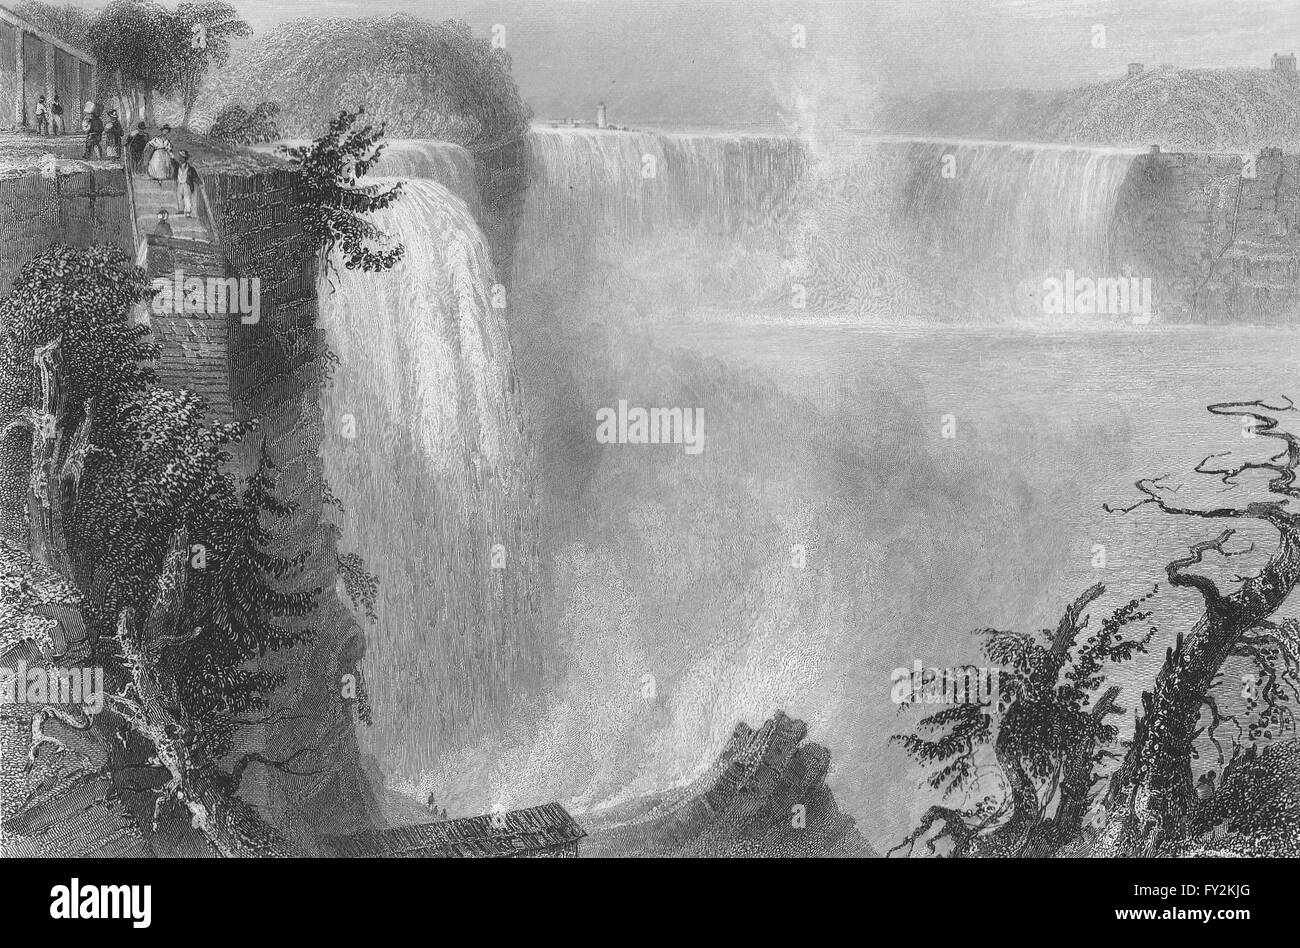 Niagara Falls from top of the Ladder. American side. New York. BARTLETT, 1840 Stock Photo